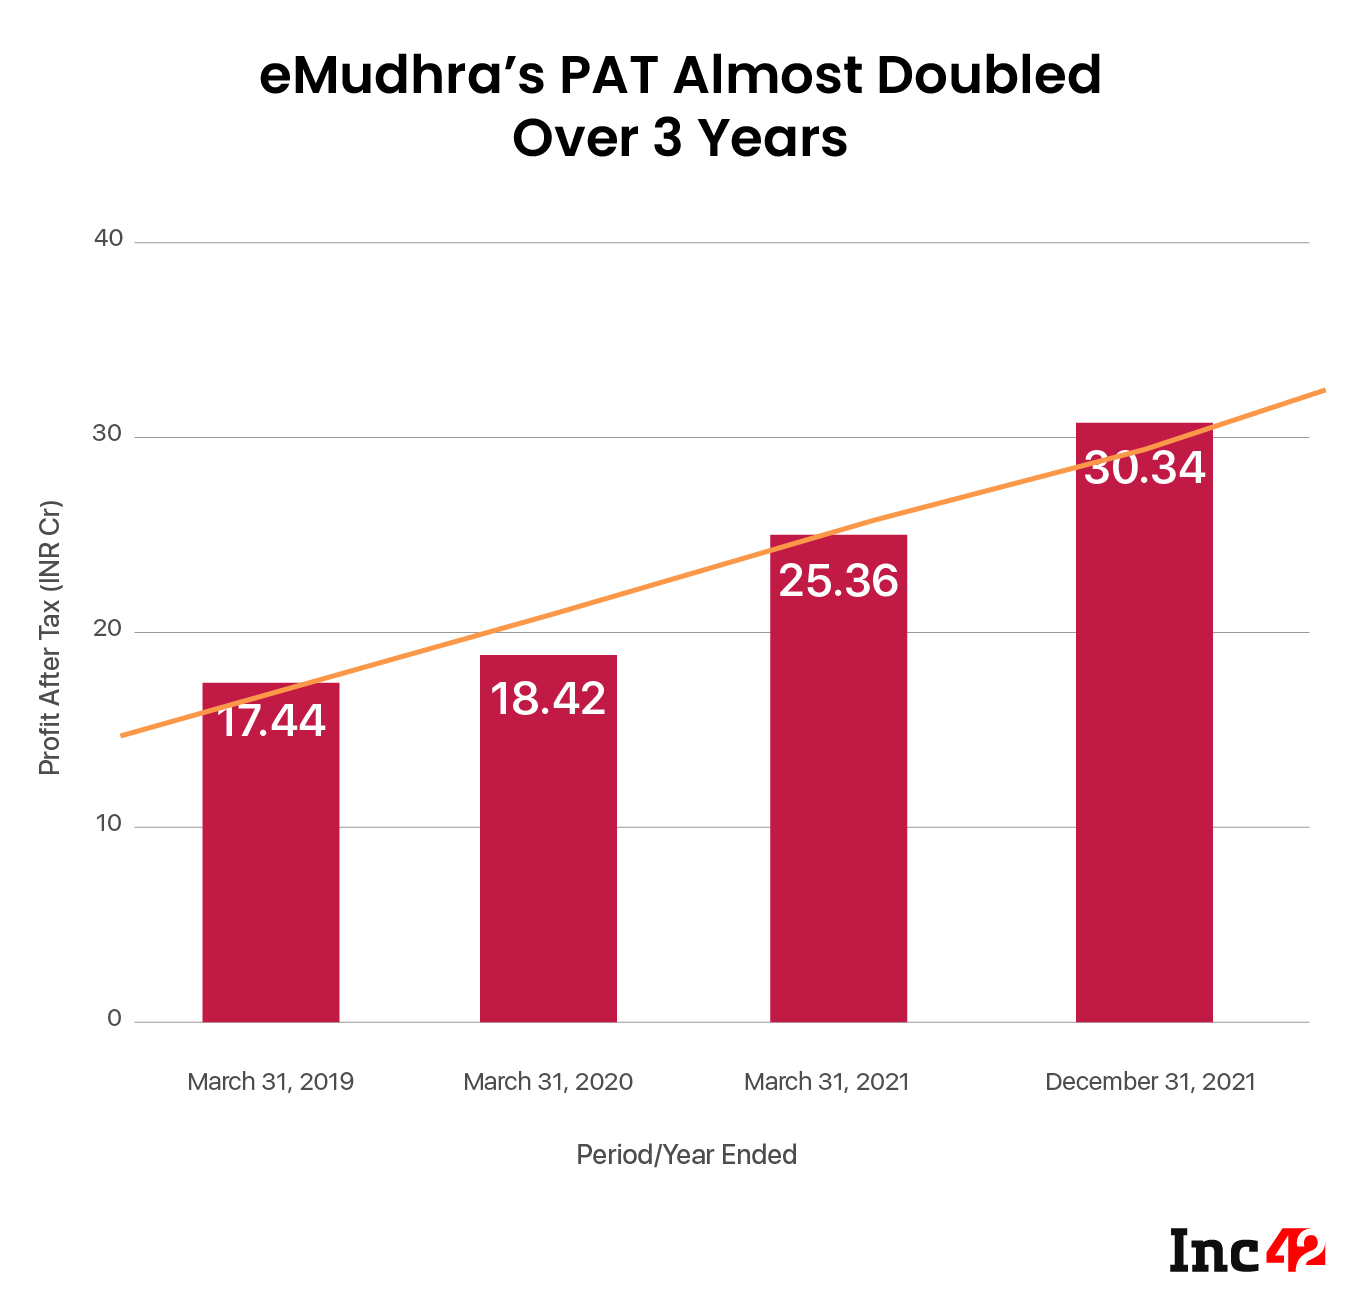 eMudhra's PAT almost double over 3 years